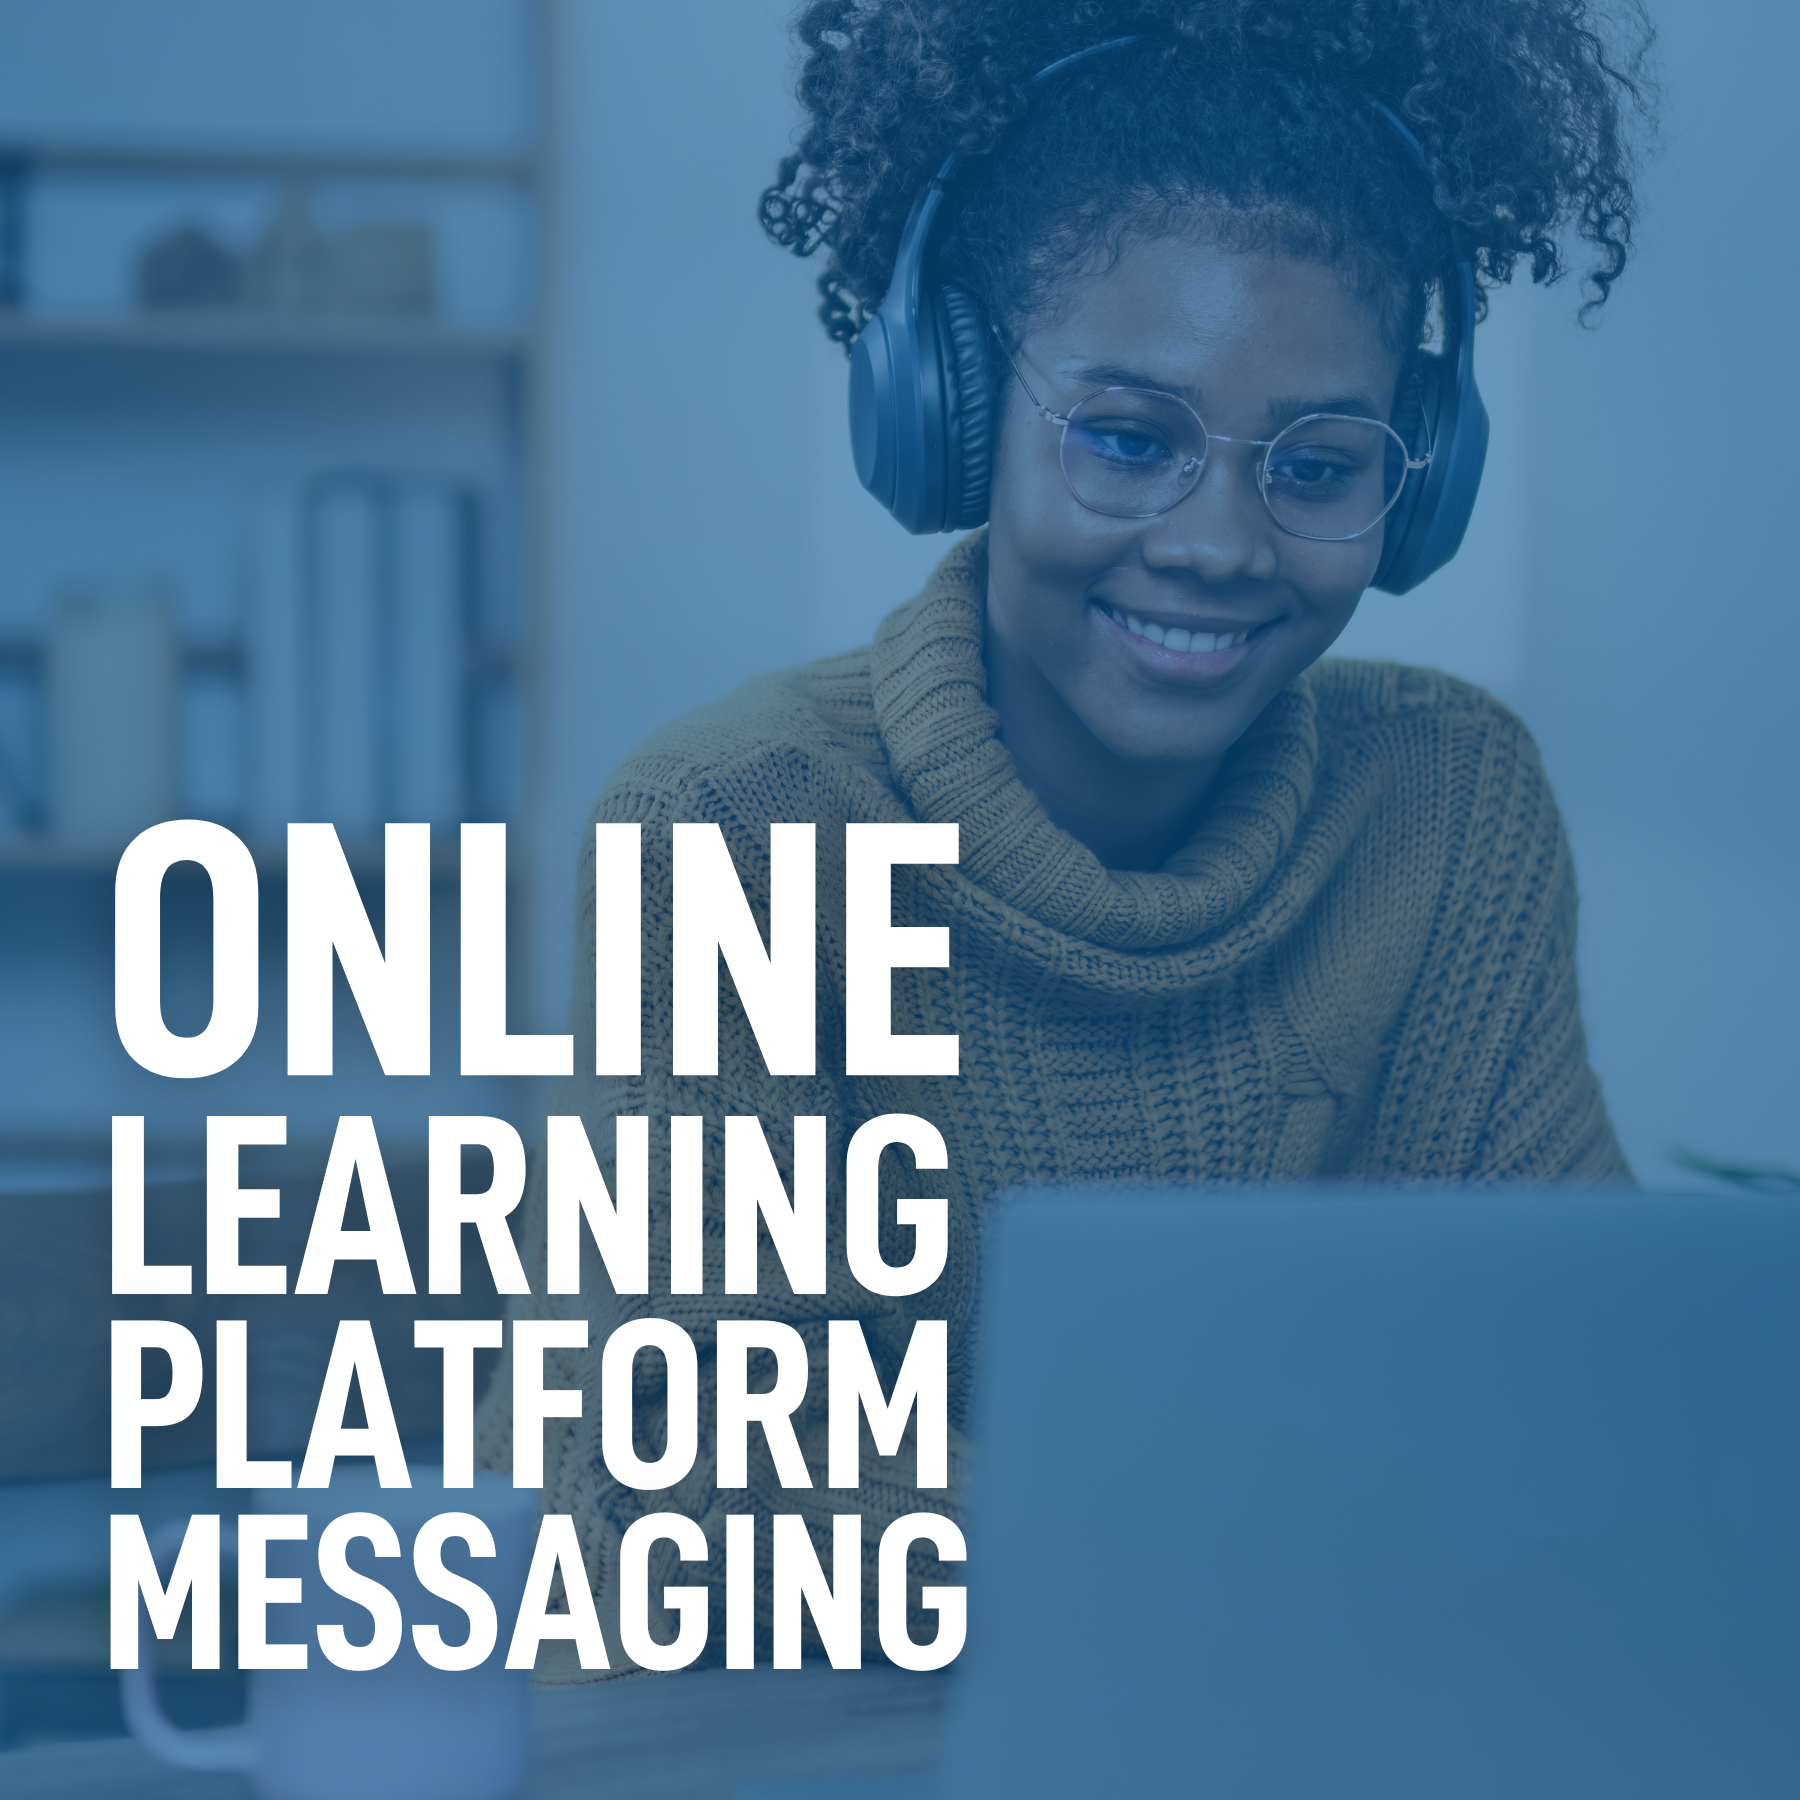 Online learning platform messaging icon